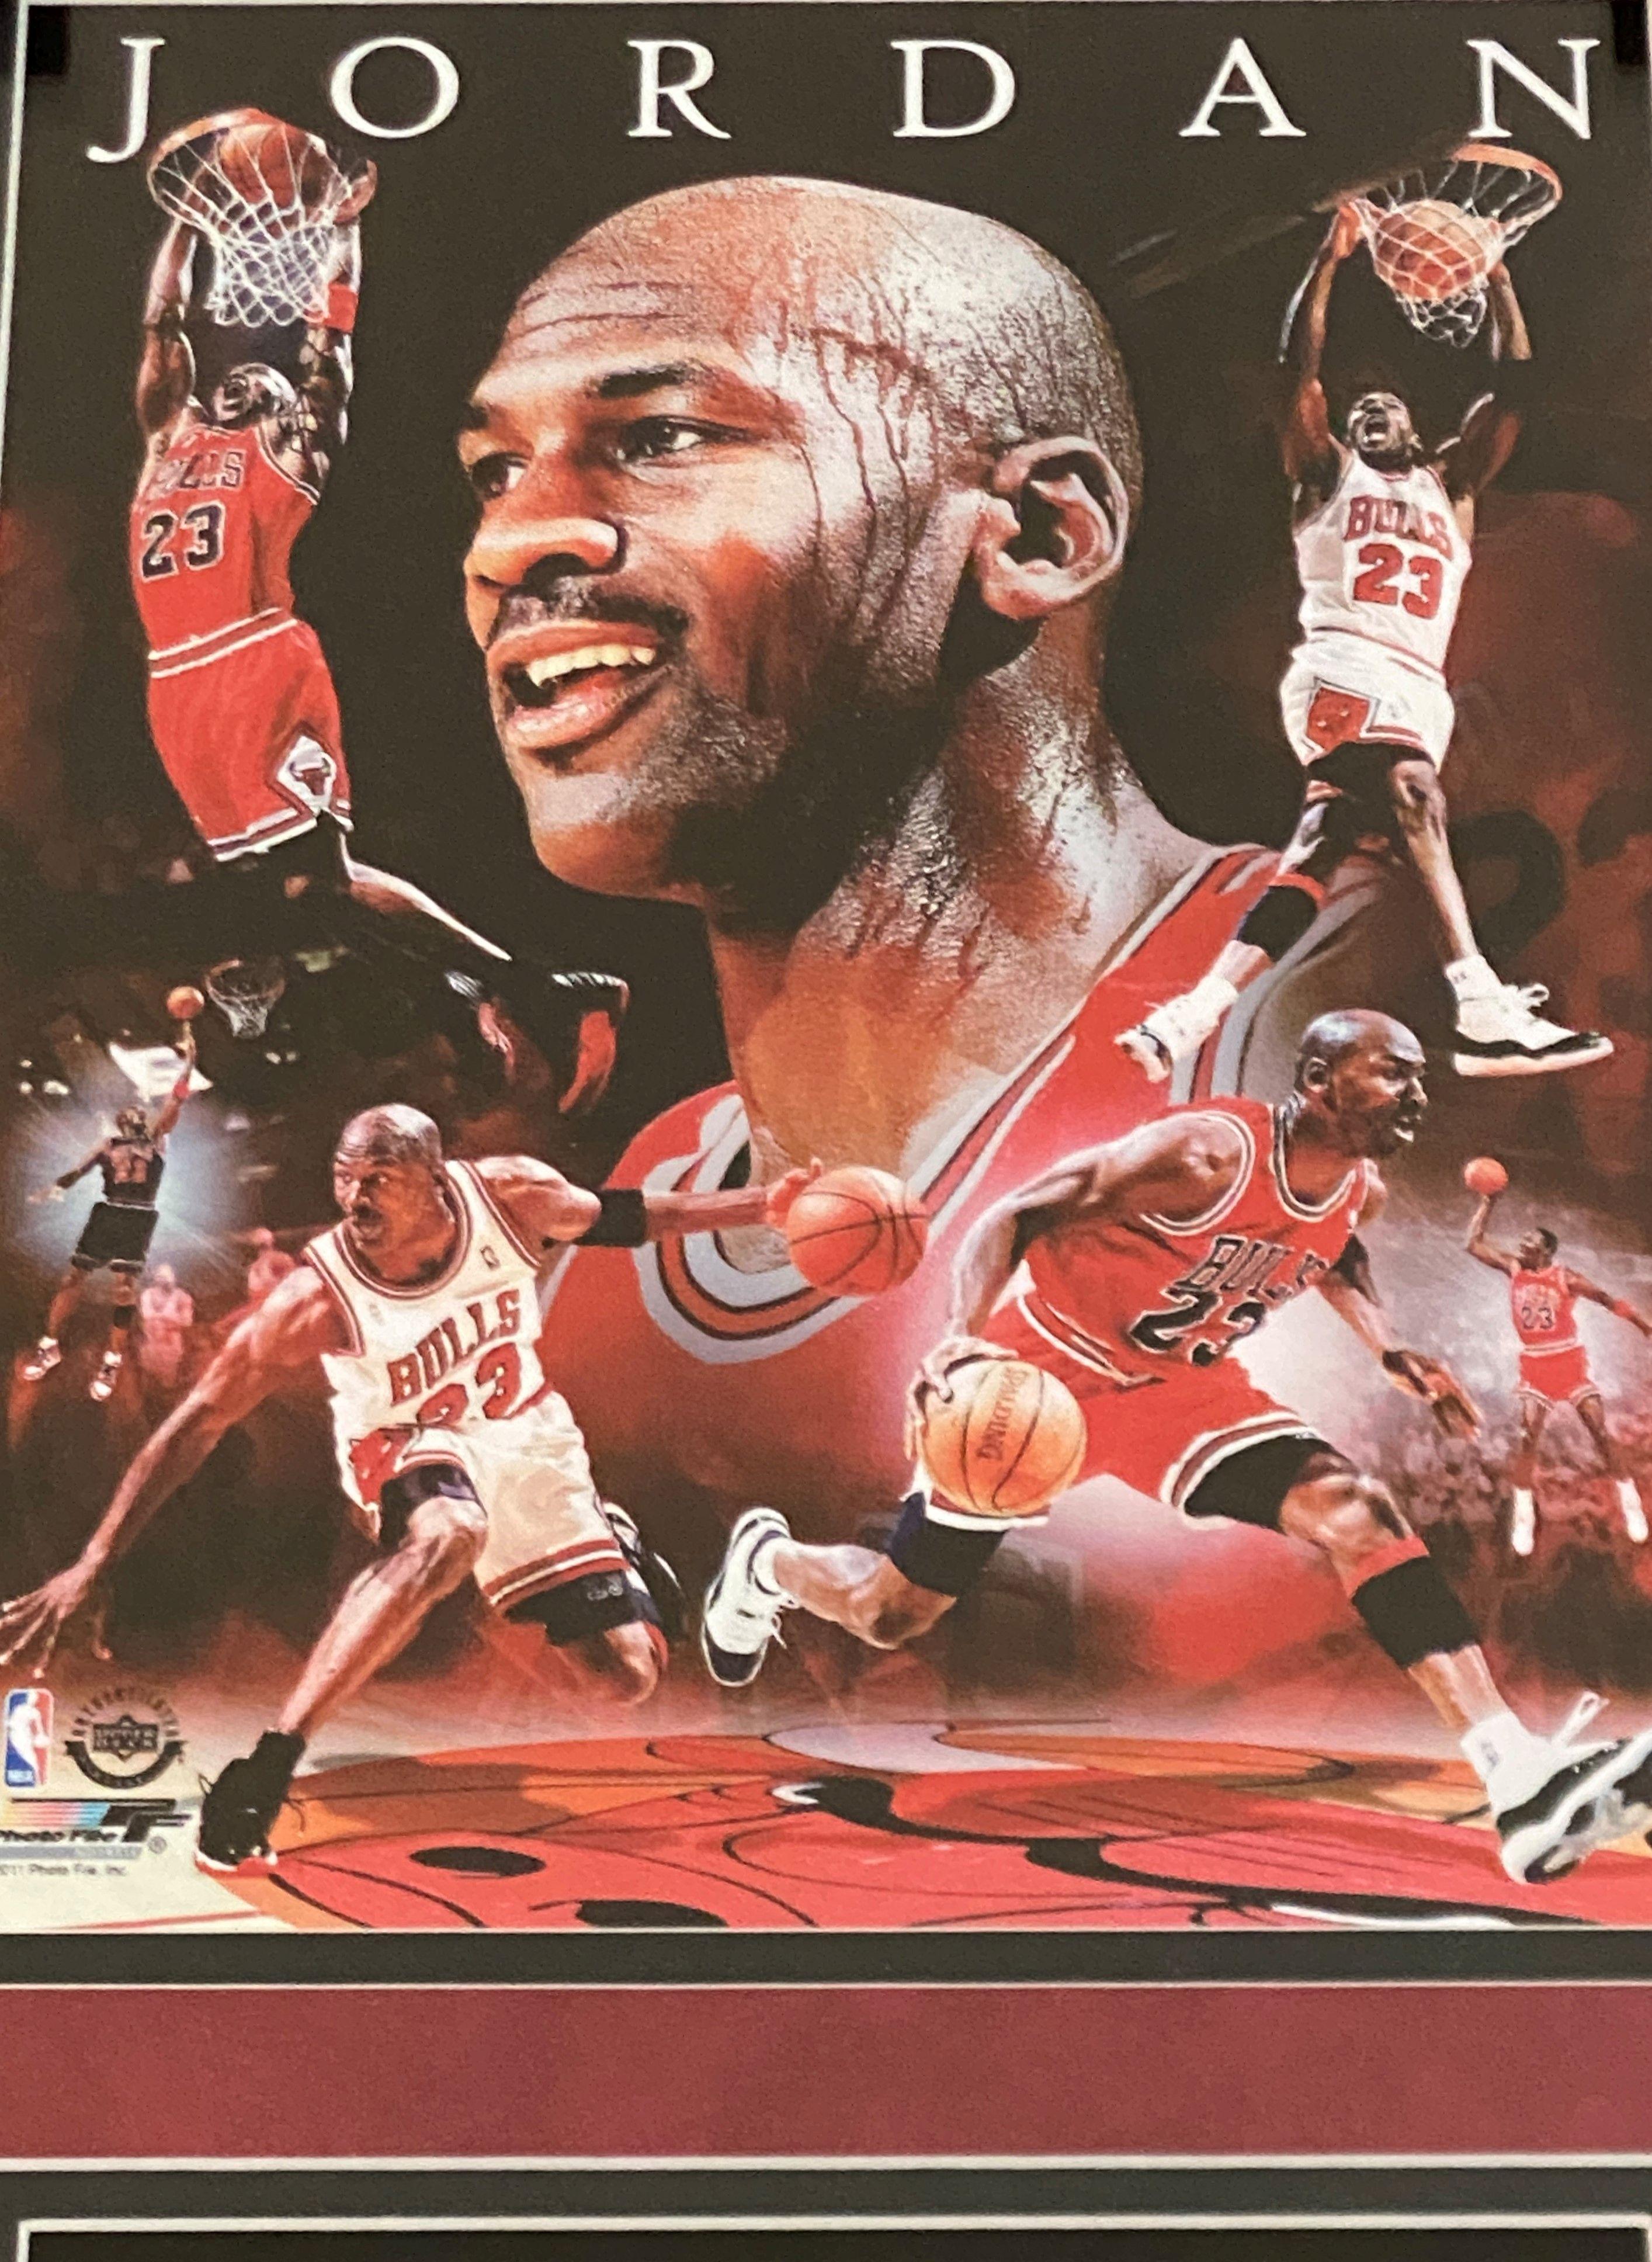 Michael Jordan (6) Time NBA Championship Ring Set in a framed and matted Laser cut Collage